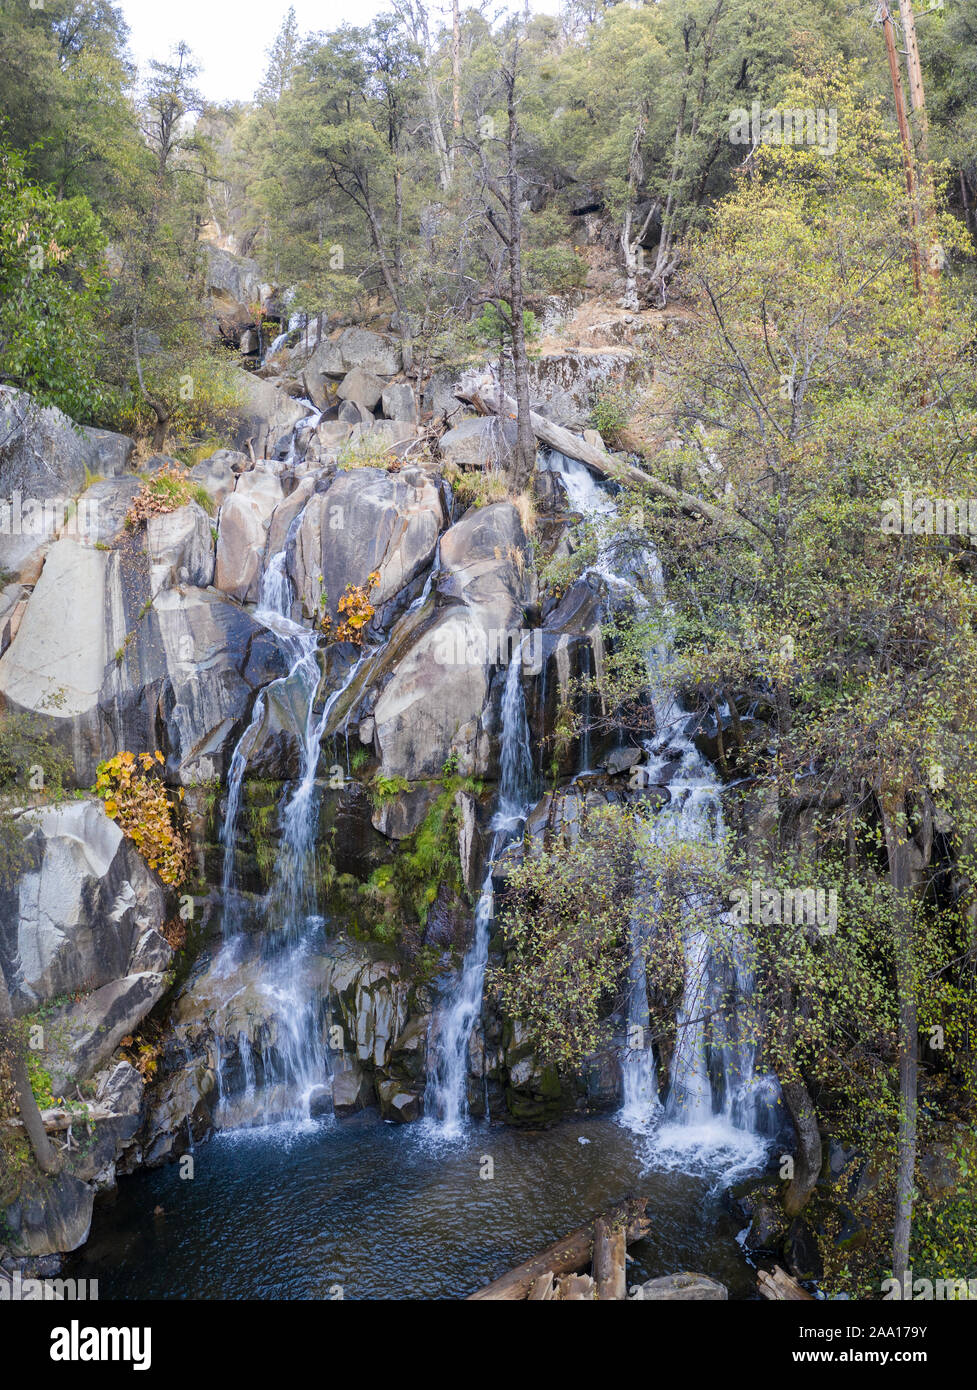 Freshwater from a stream tumbles down a rocky cliff face forming a beautiful waterfall in a wild California forest. Stock Photo